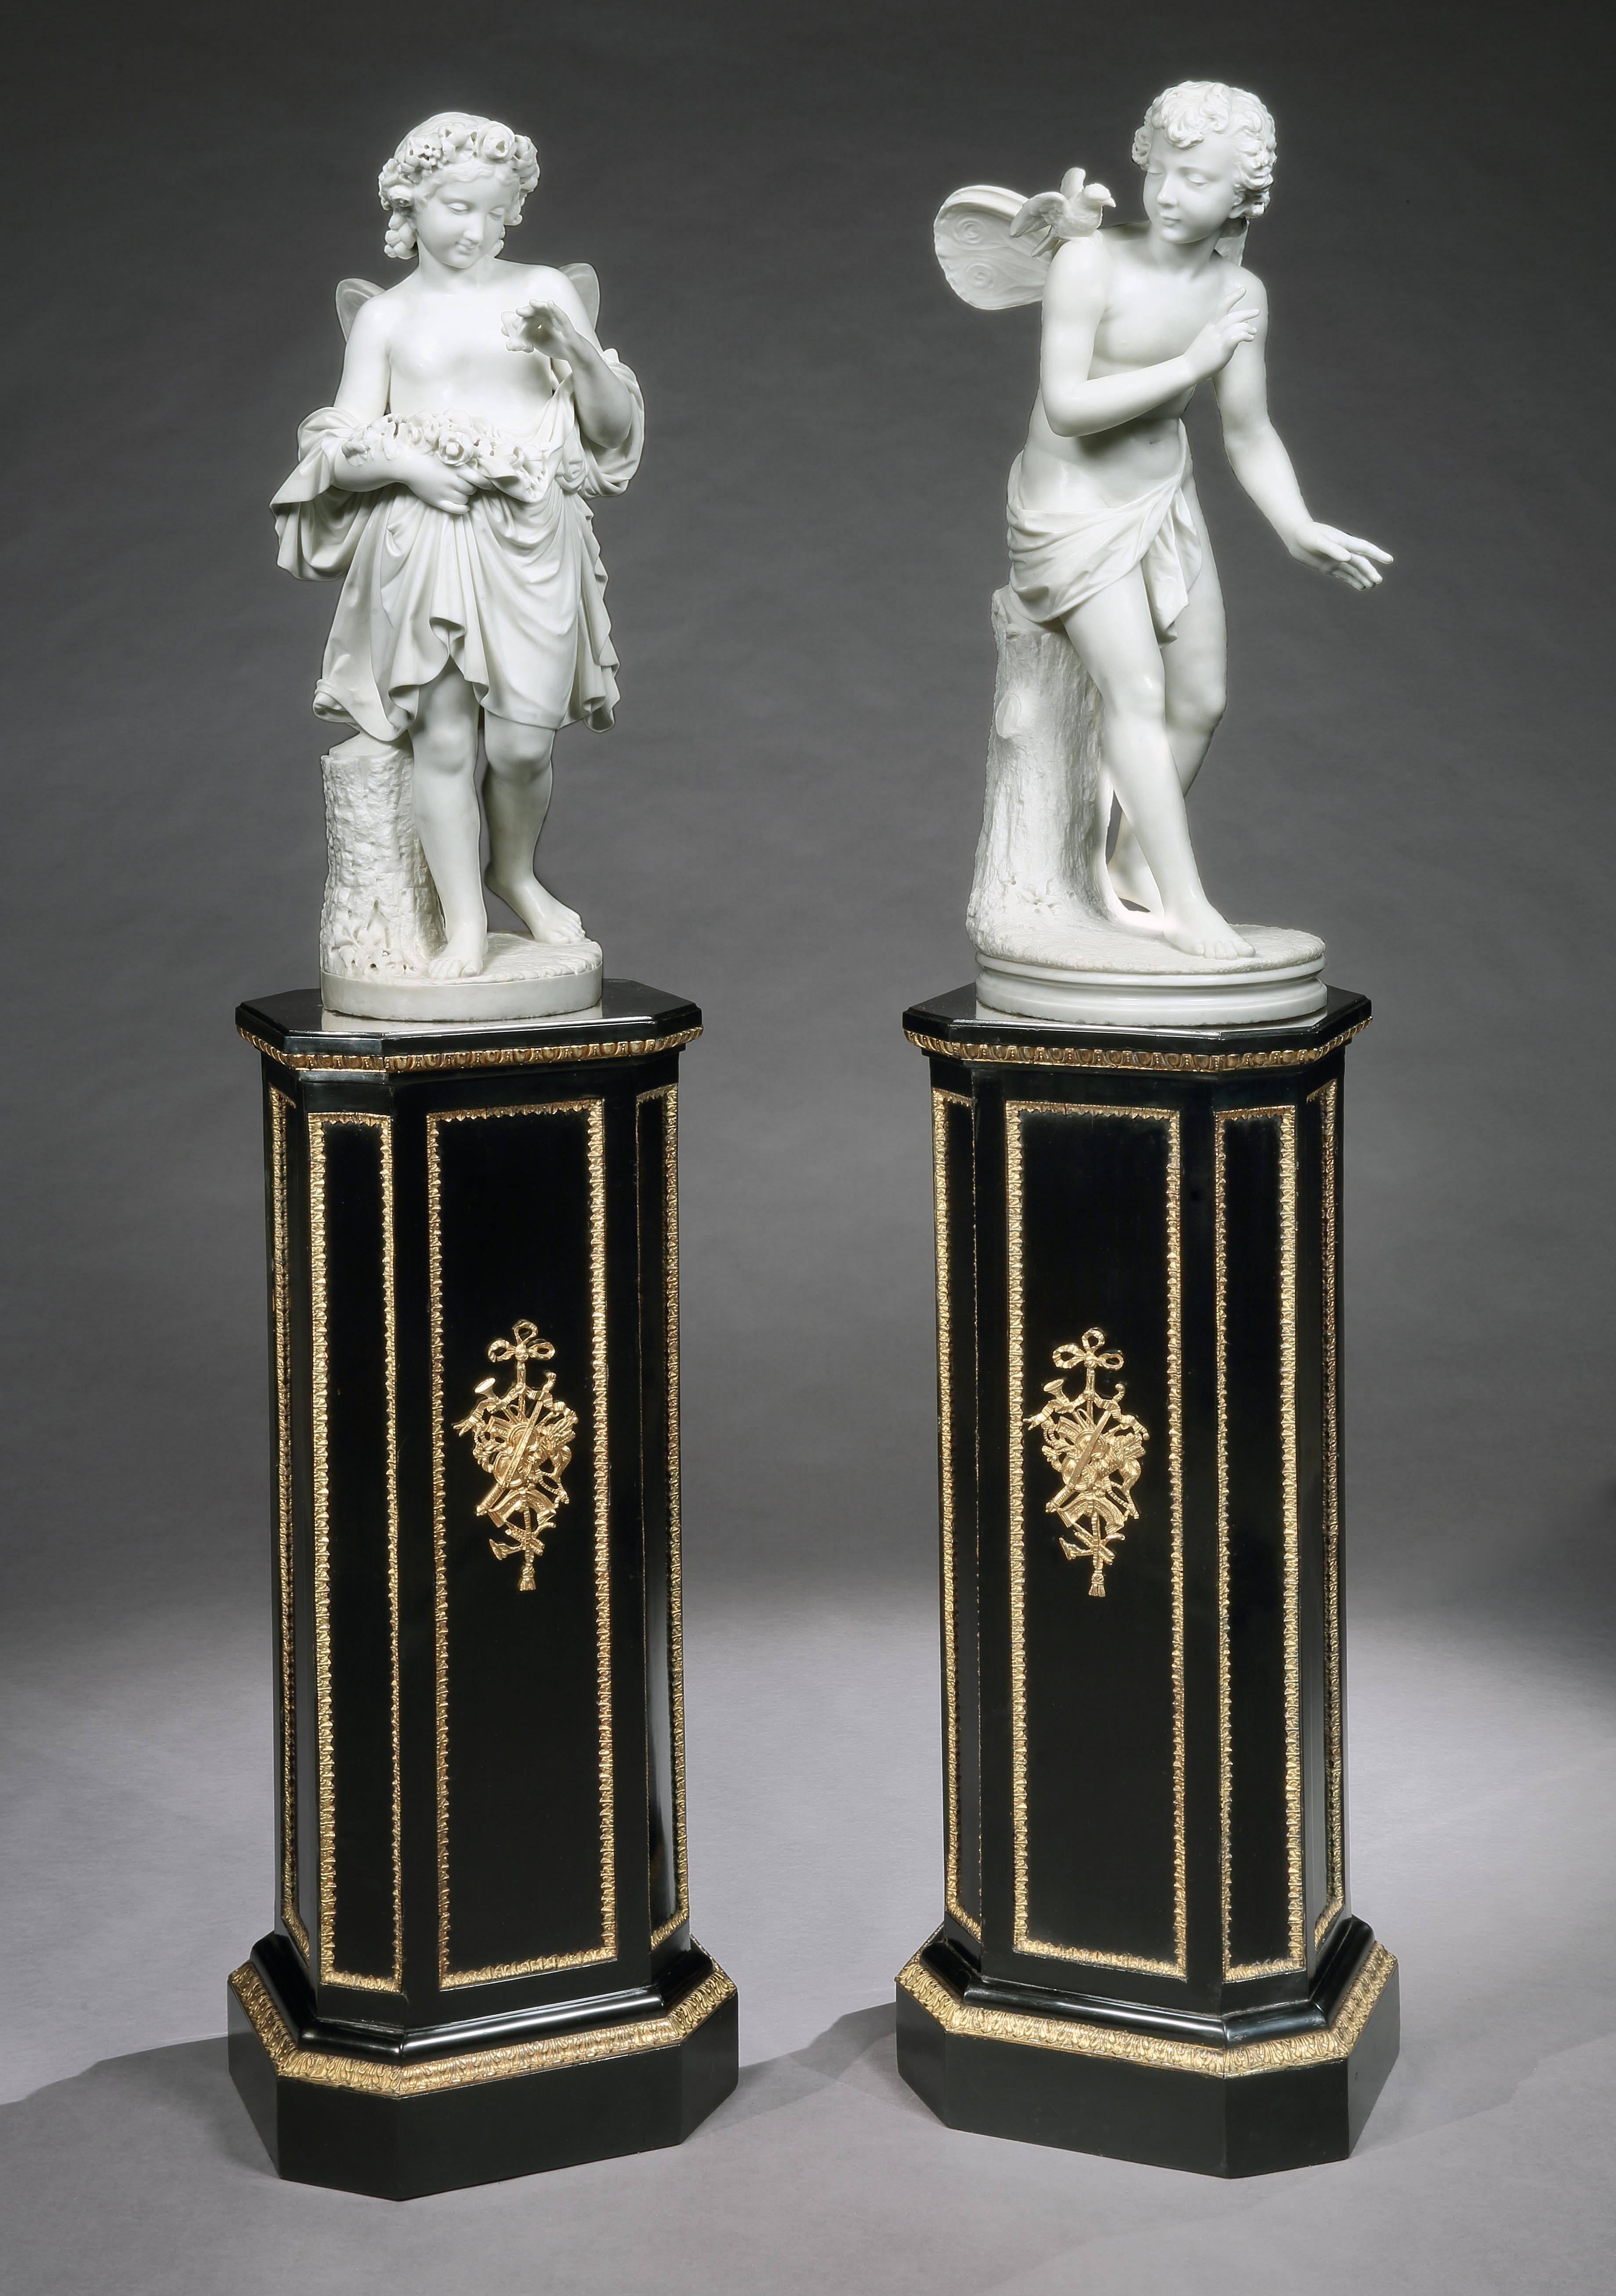 Two Italian, Carrara marbles

Set on circular bases, of Fairies, next to tree stumps; the male fairy regarding a dove perched on his shoulder, the female fairy smiling at the butterfly she holds.
Italian, circa 1880.
  